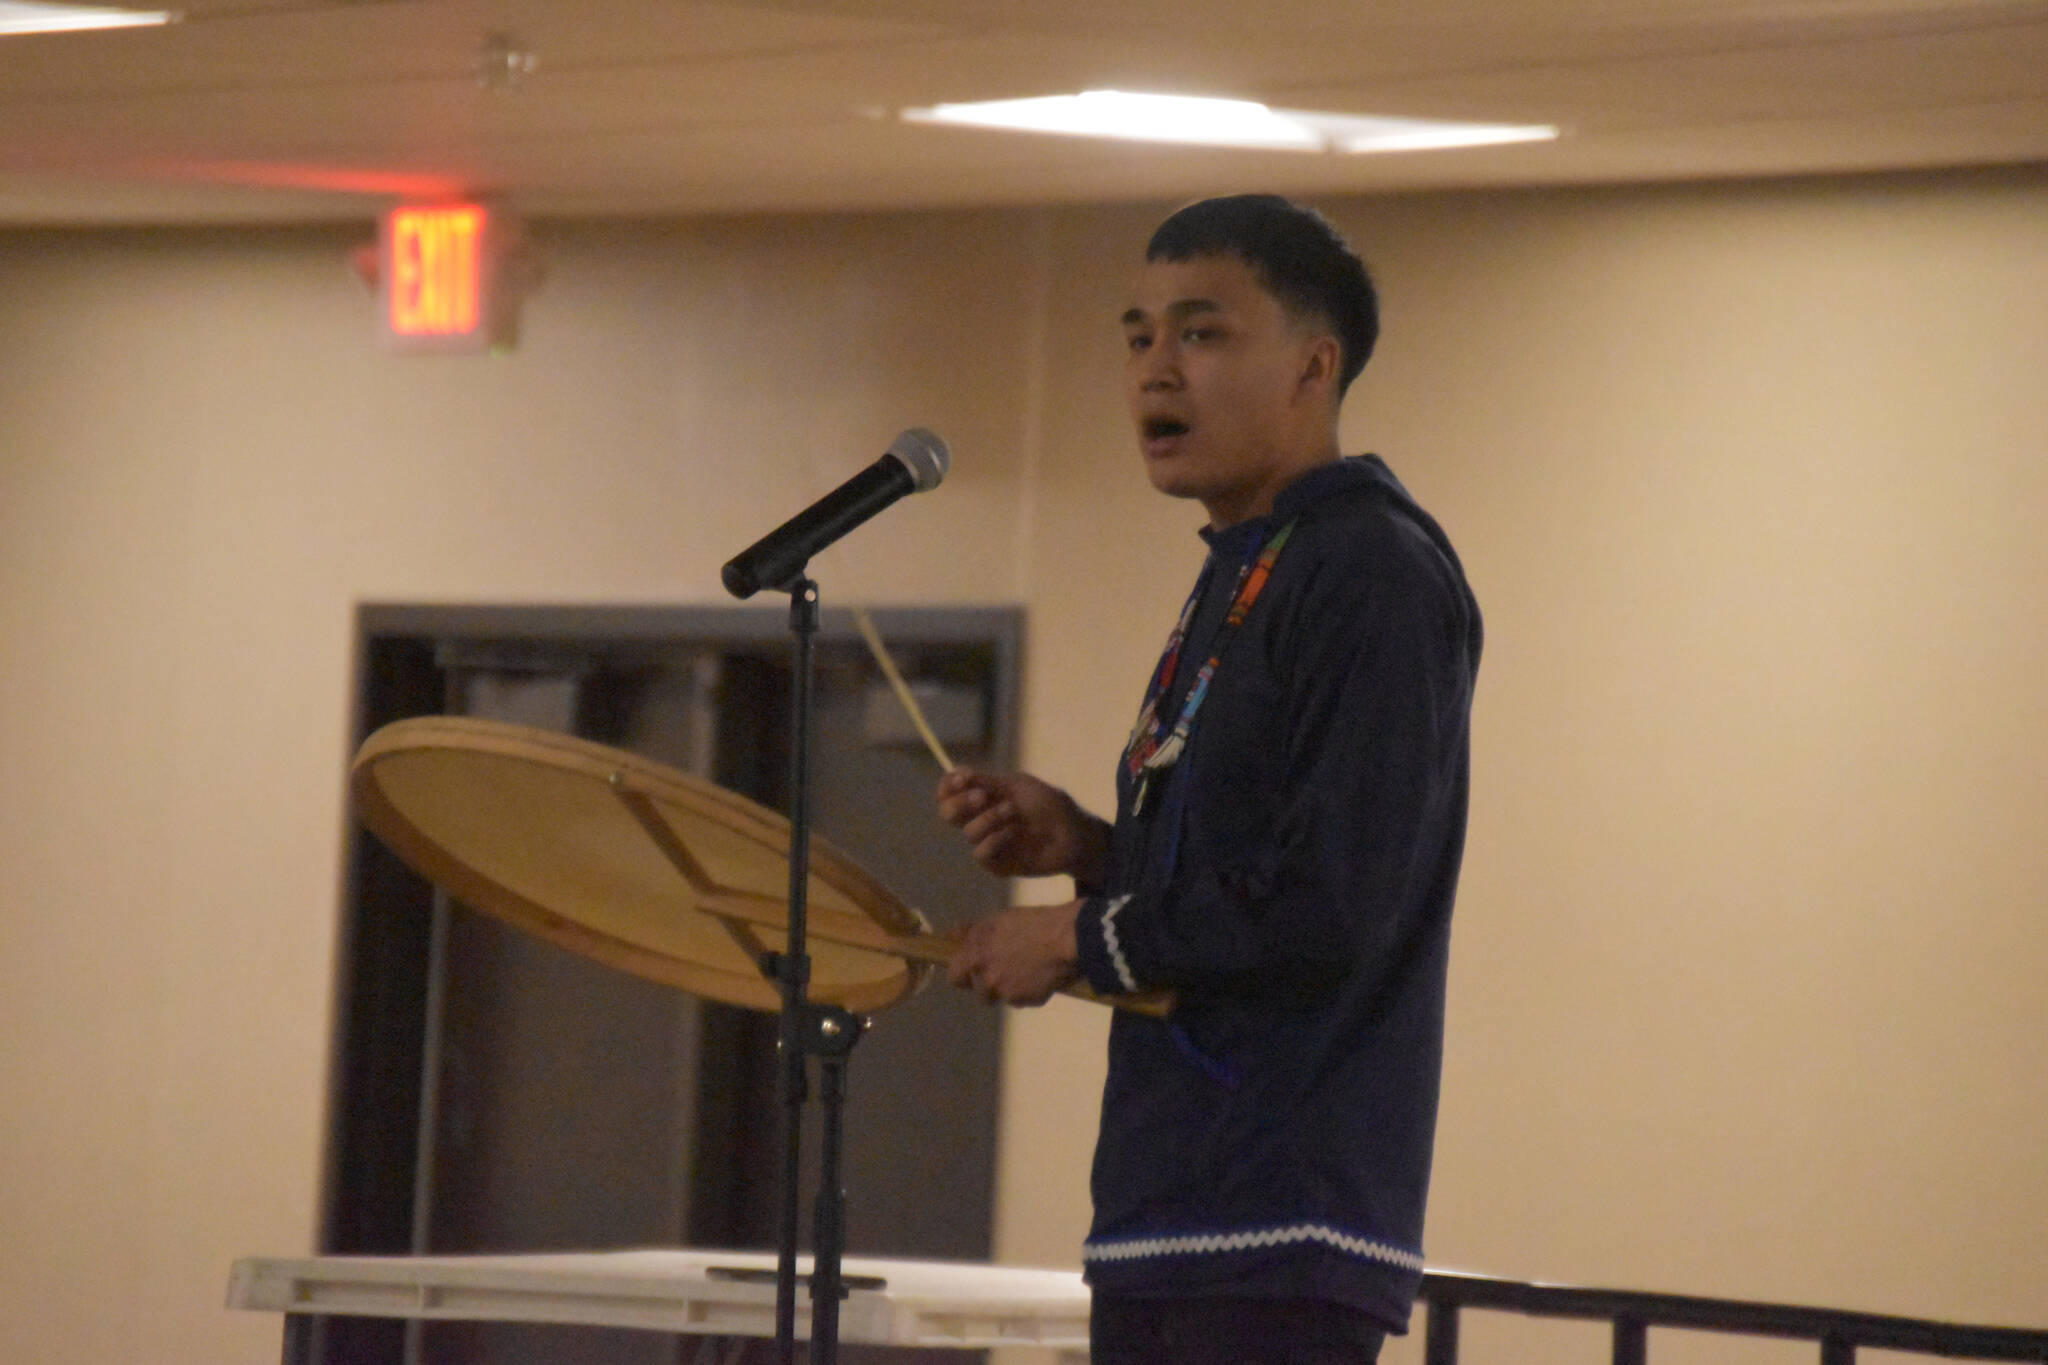 Byron Nicholai, of “I Sing, You Dance,” sings and drums during a musical performance as part of the Kahtnuht’ana Hey Chi’ula NYO Invitational on Saturday, Jan. 14, 2023, at the Kahtnuht’ana Duhdeldiht Campus in Kenai, Alaska. (Jake Dye/Peninsula Clarion)